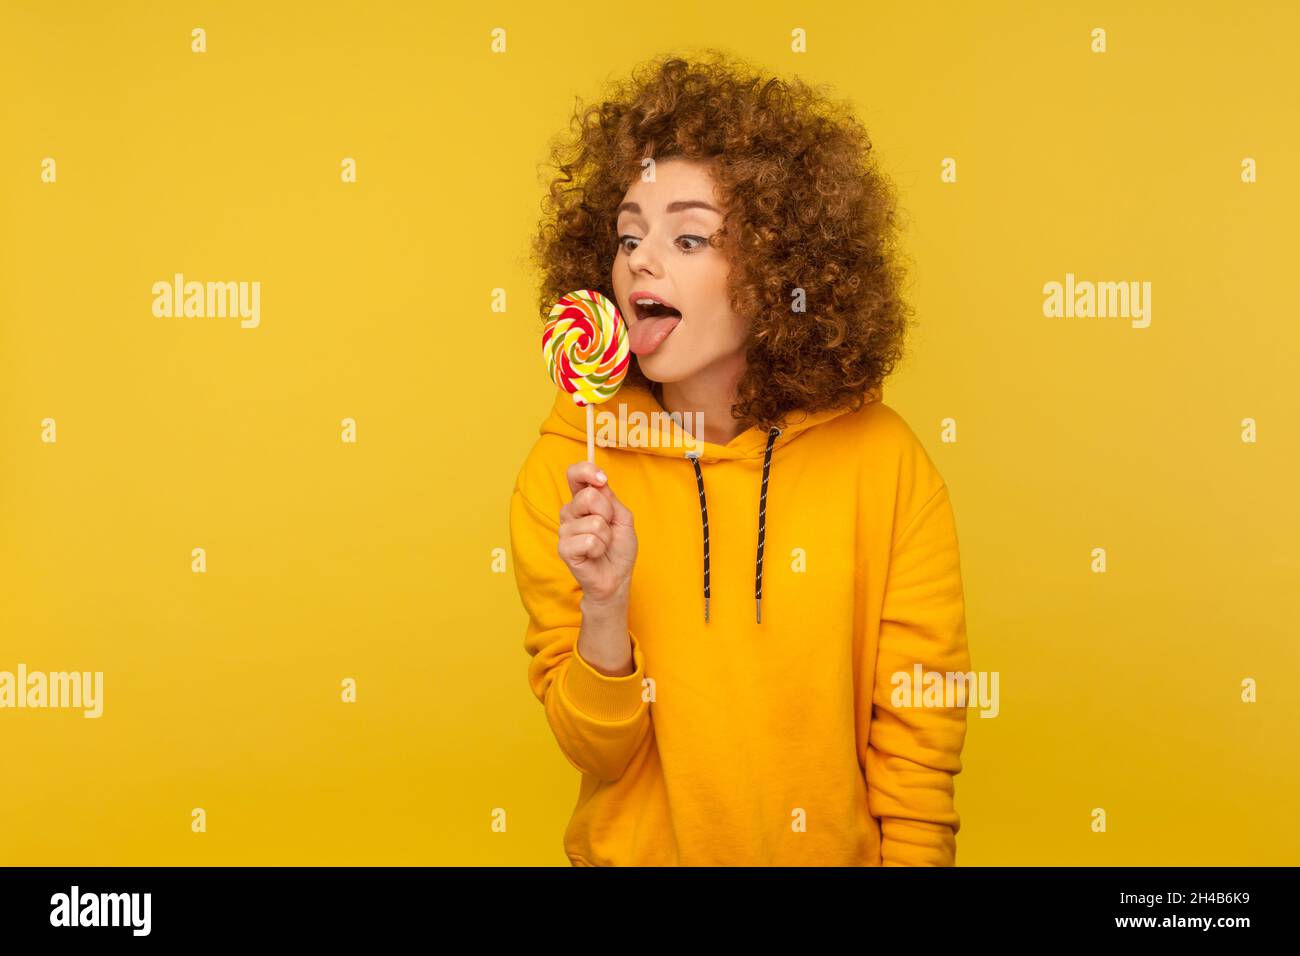 Attractive woman sticking out tongue licking lollipop, tasting sweet round candy, enjoying delicious flavor dessert, wearing casual style hoodie. Indoor studio shot isolated on yellow background. Stock Photo